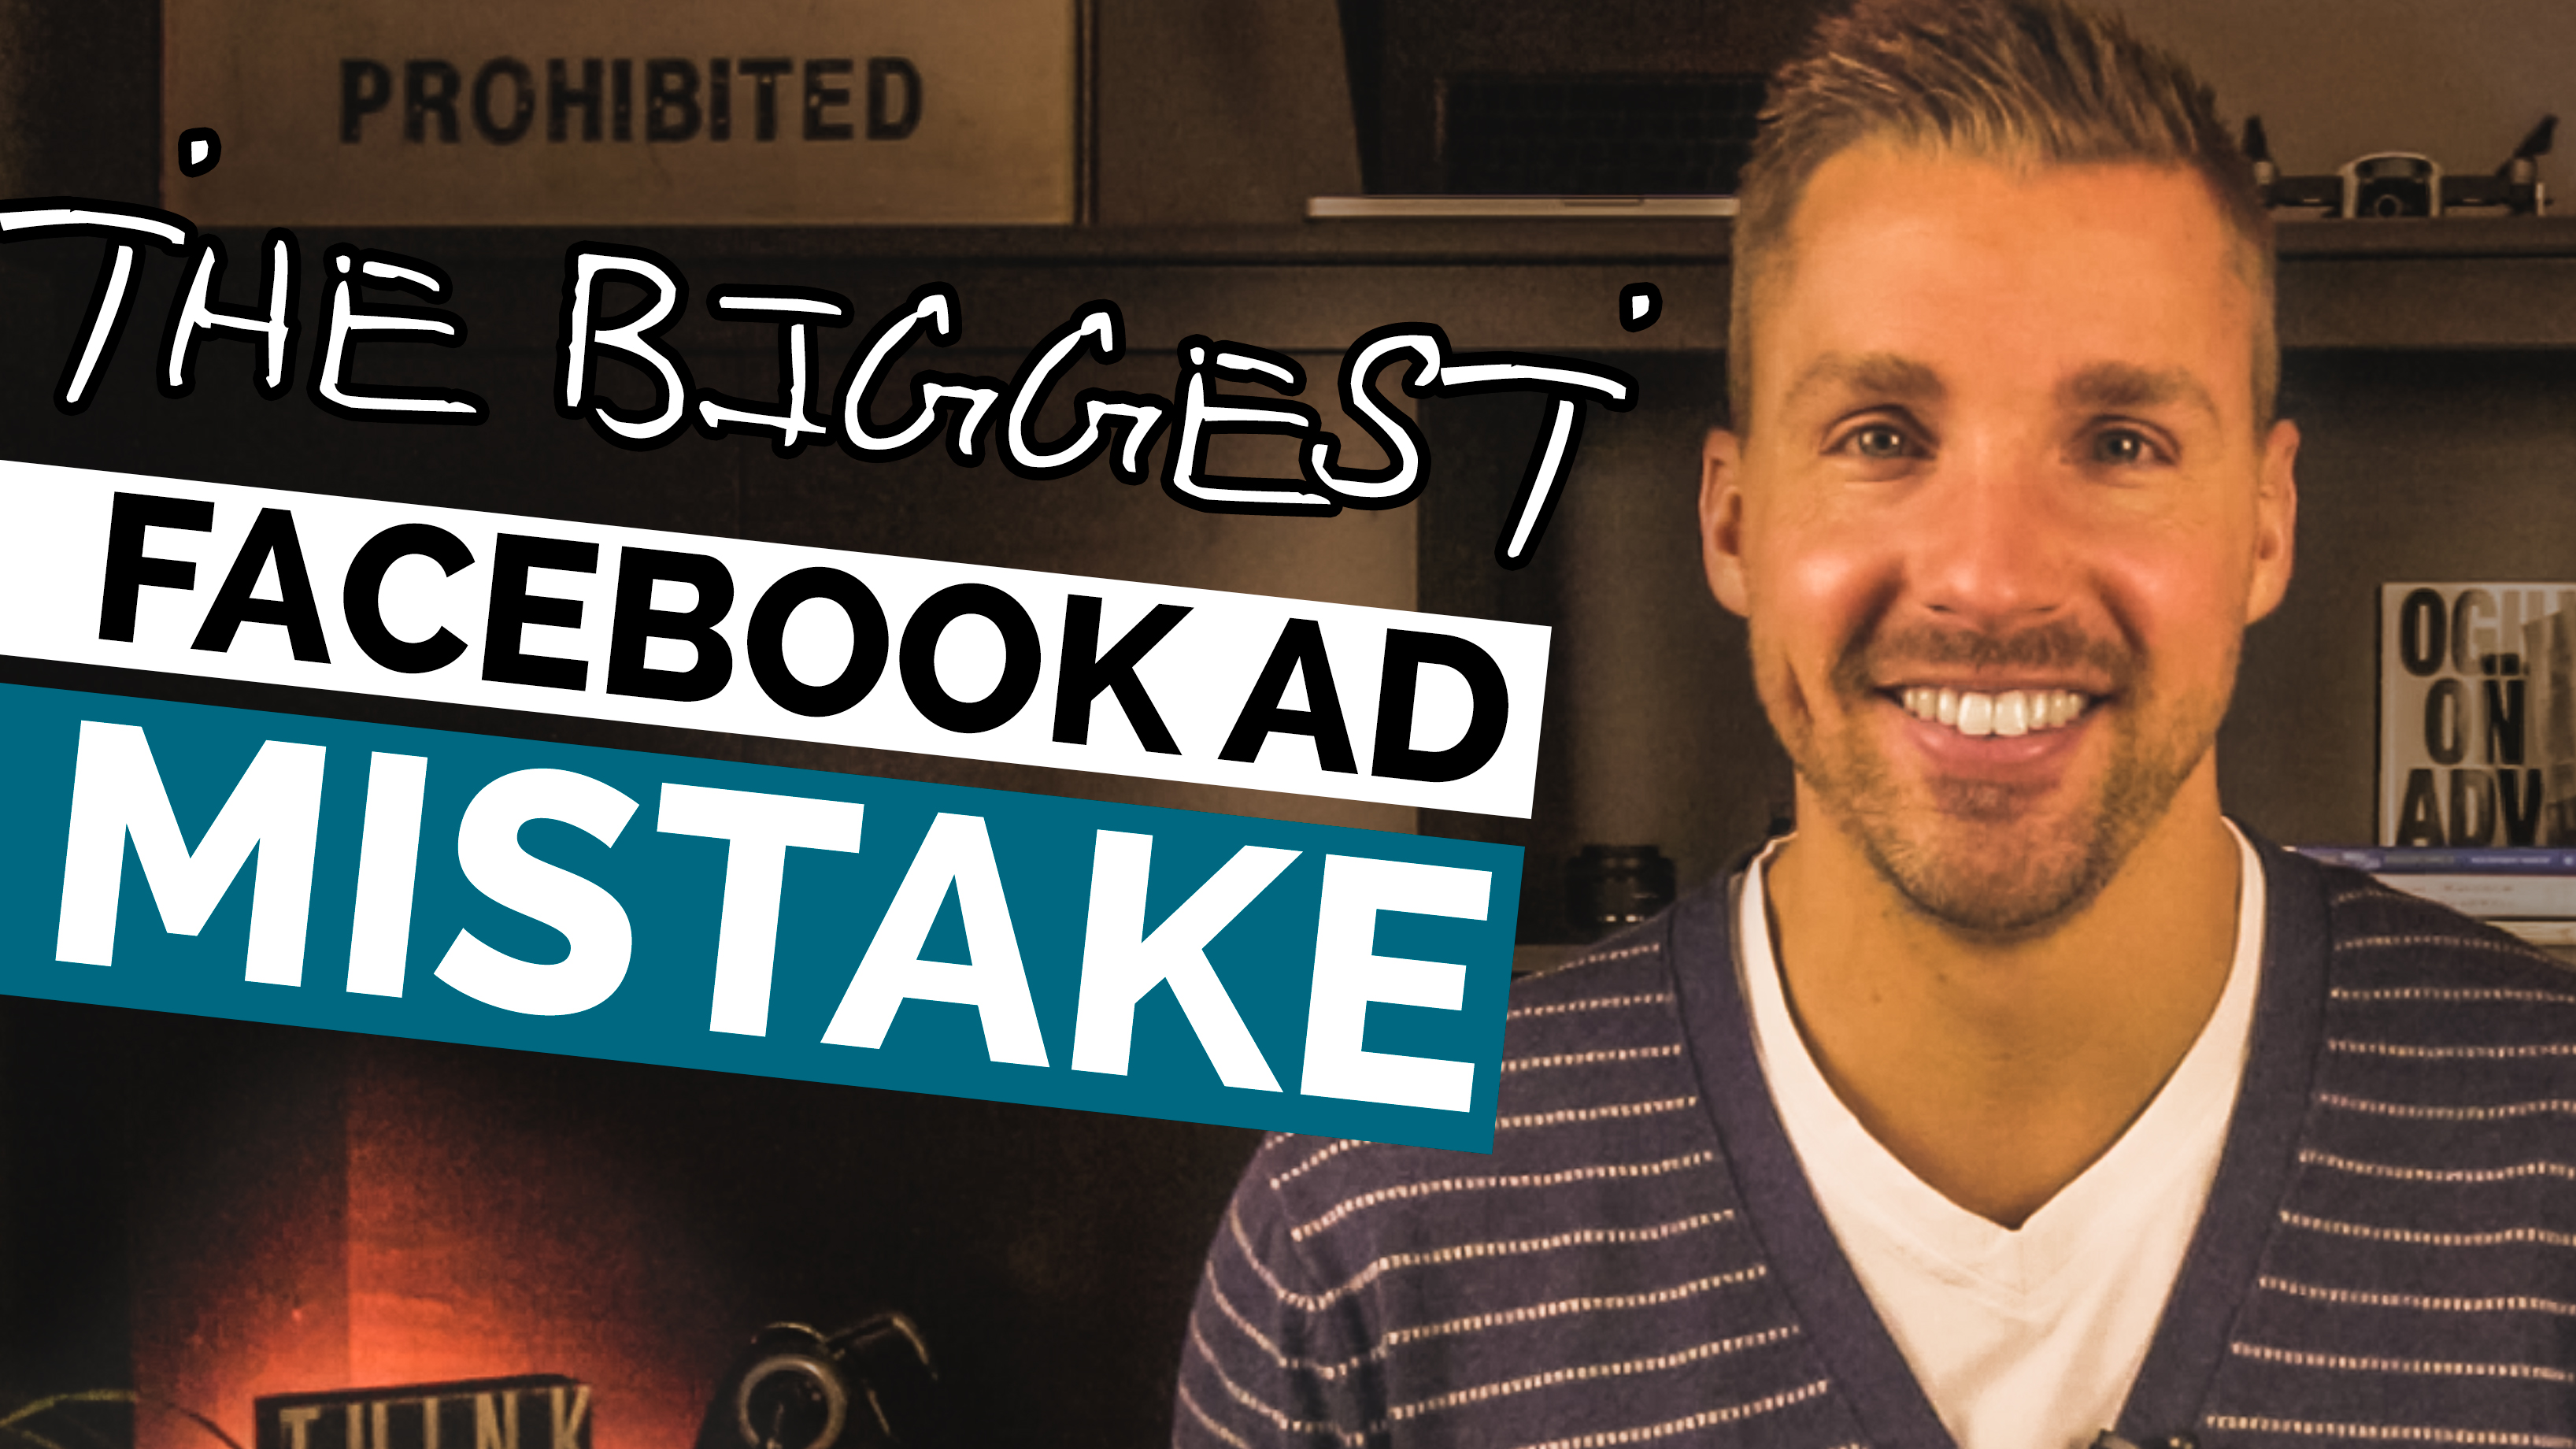 The #1 Biggest Facebook Ad Mistake Nearly Everyone Makes